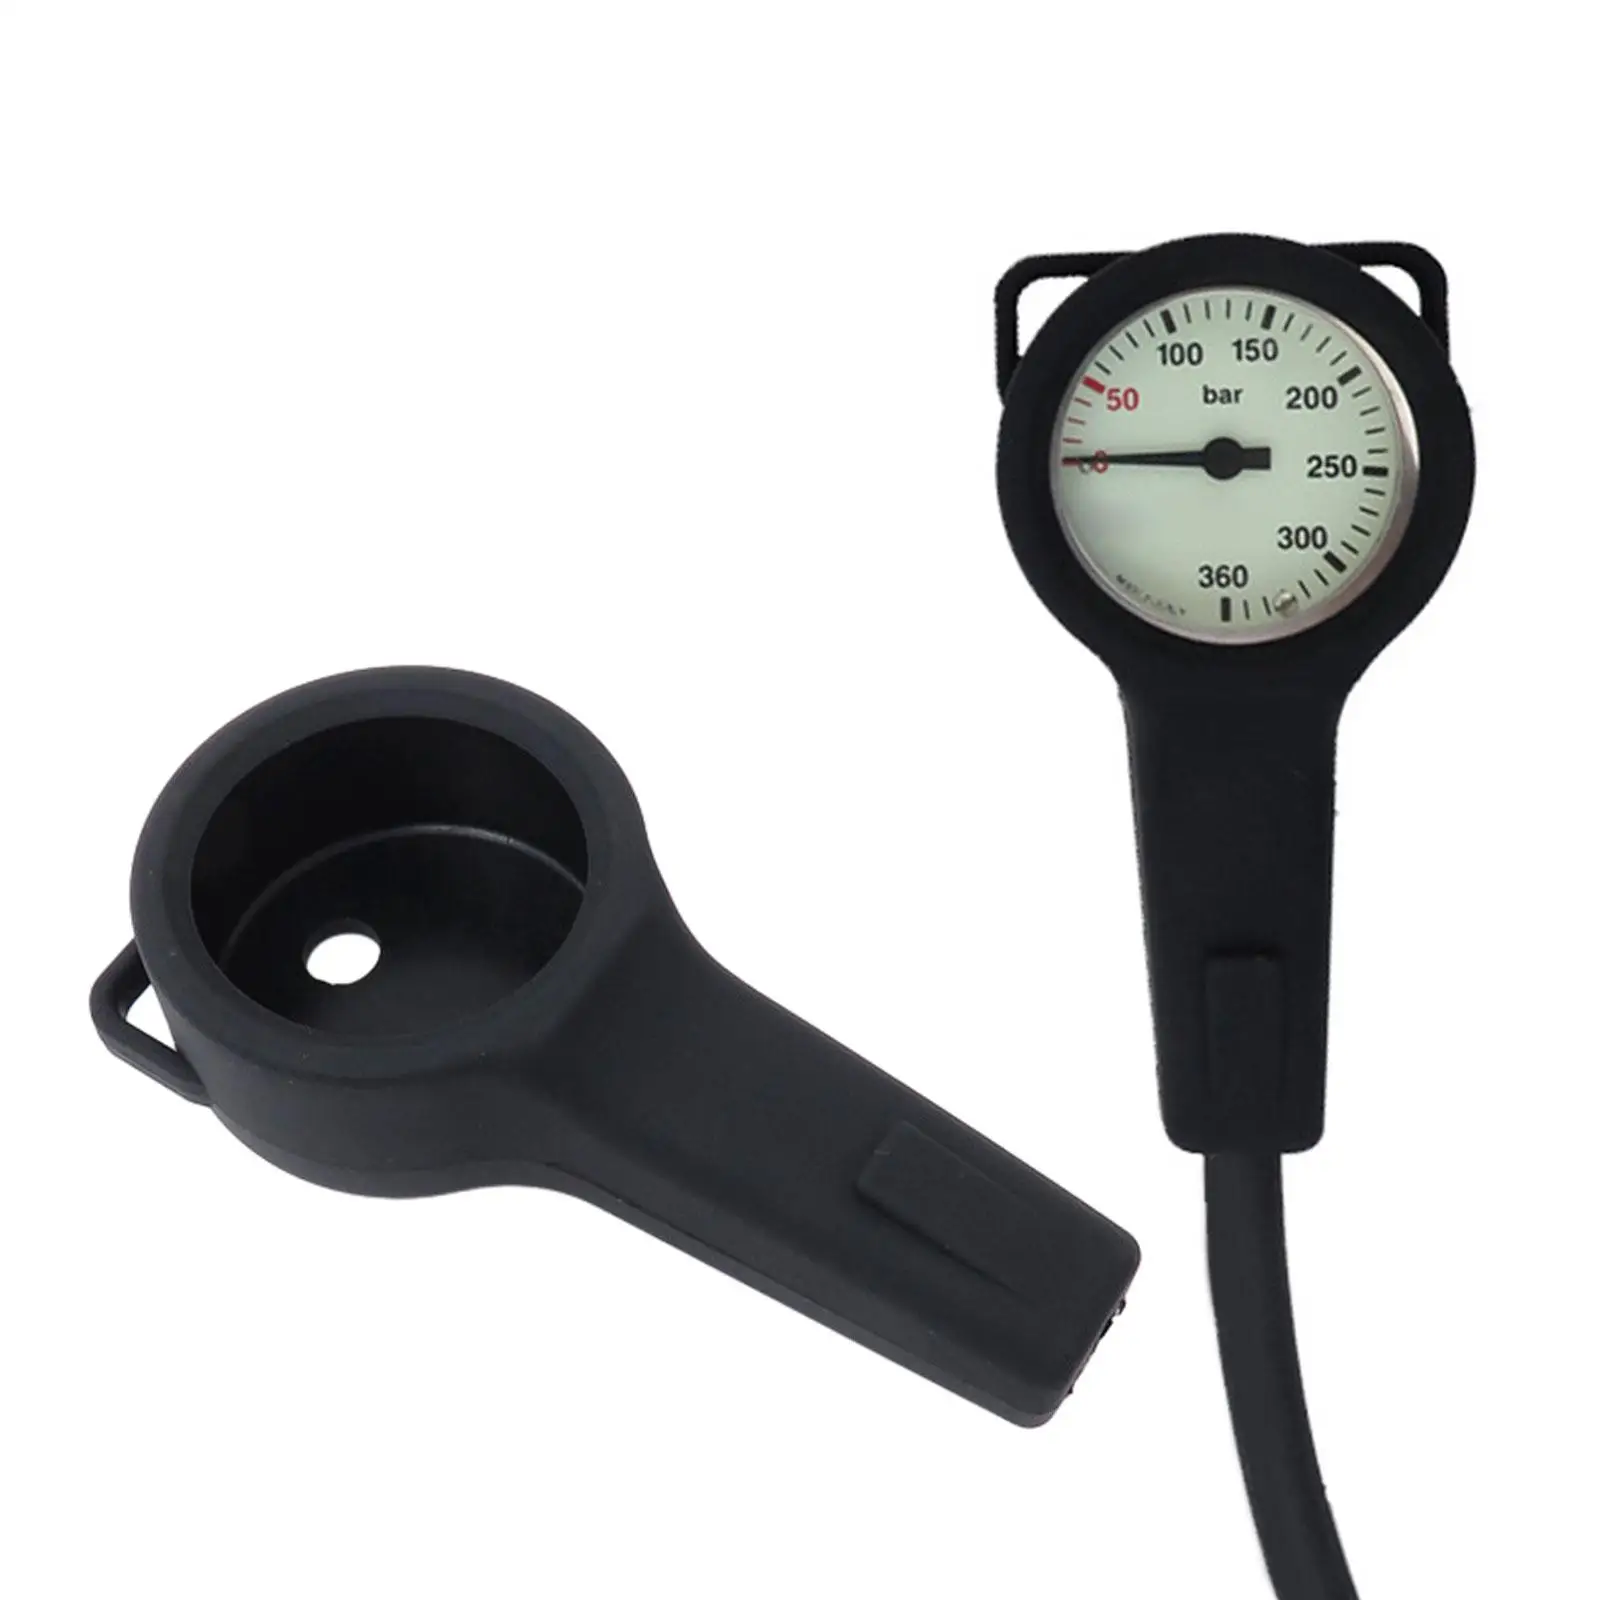 Scuba Pressure Gauge Boot Protective Cover Protection from Bumps, Scratches, Wear and Tear